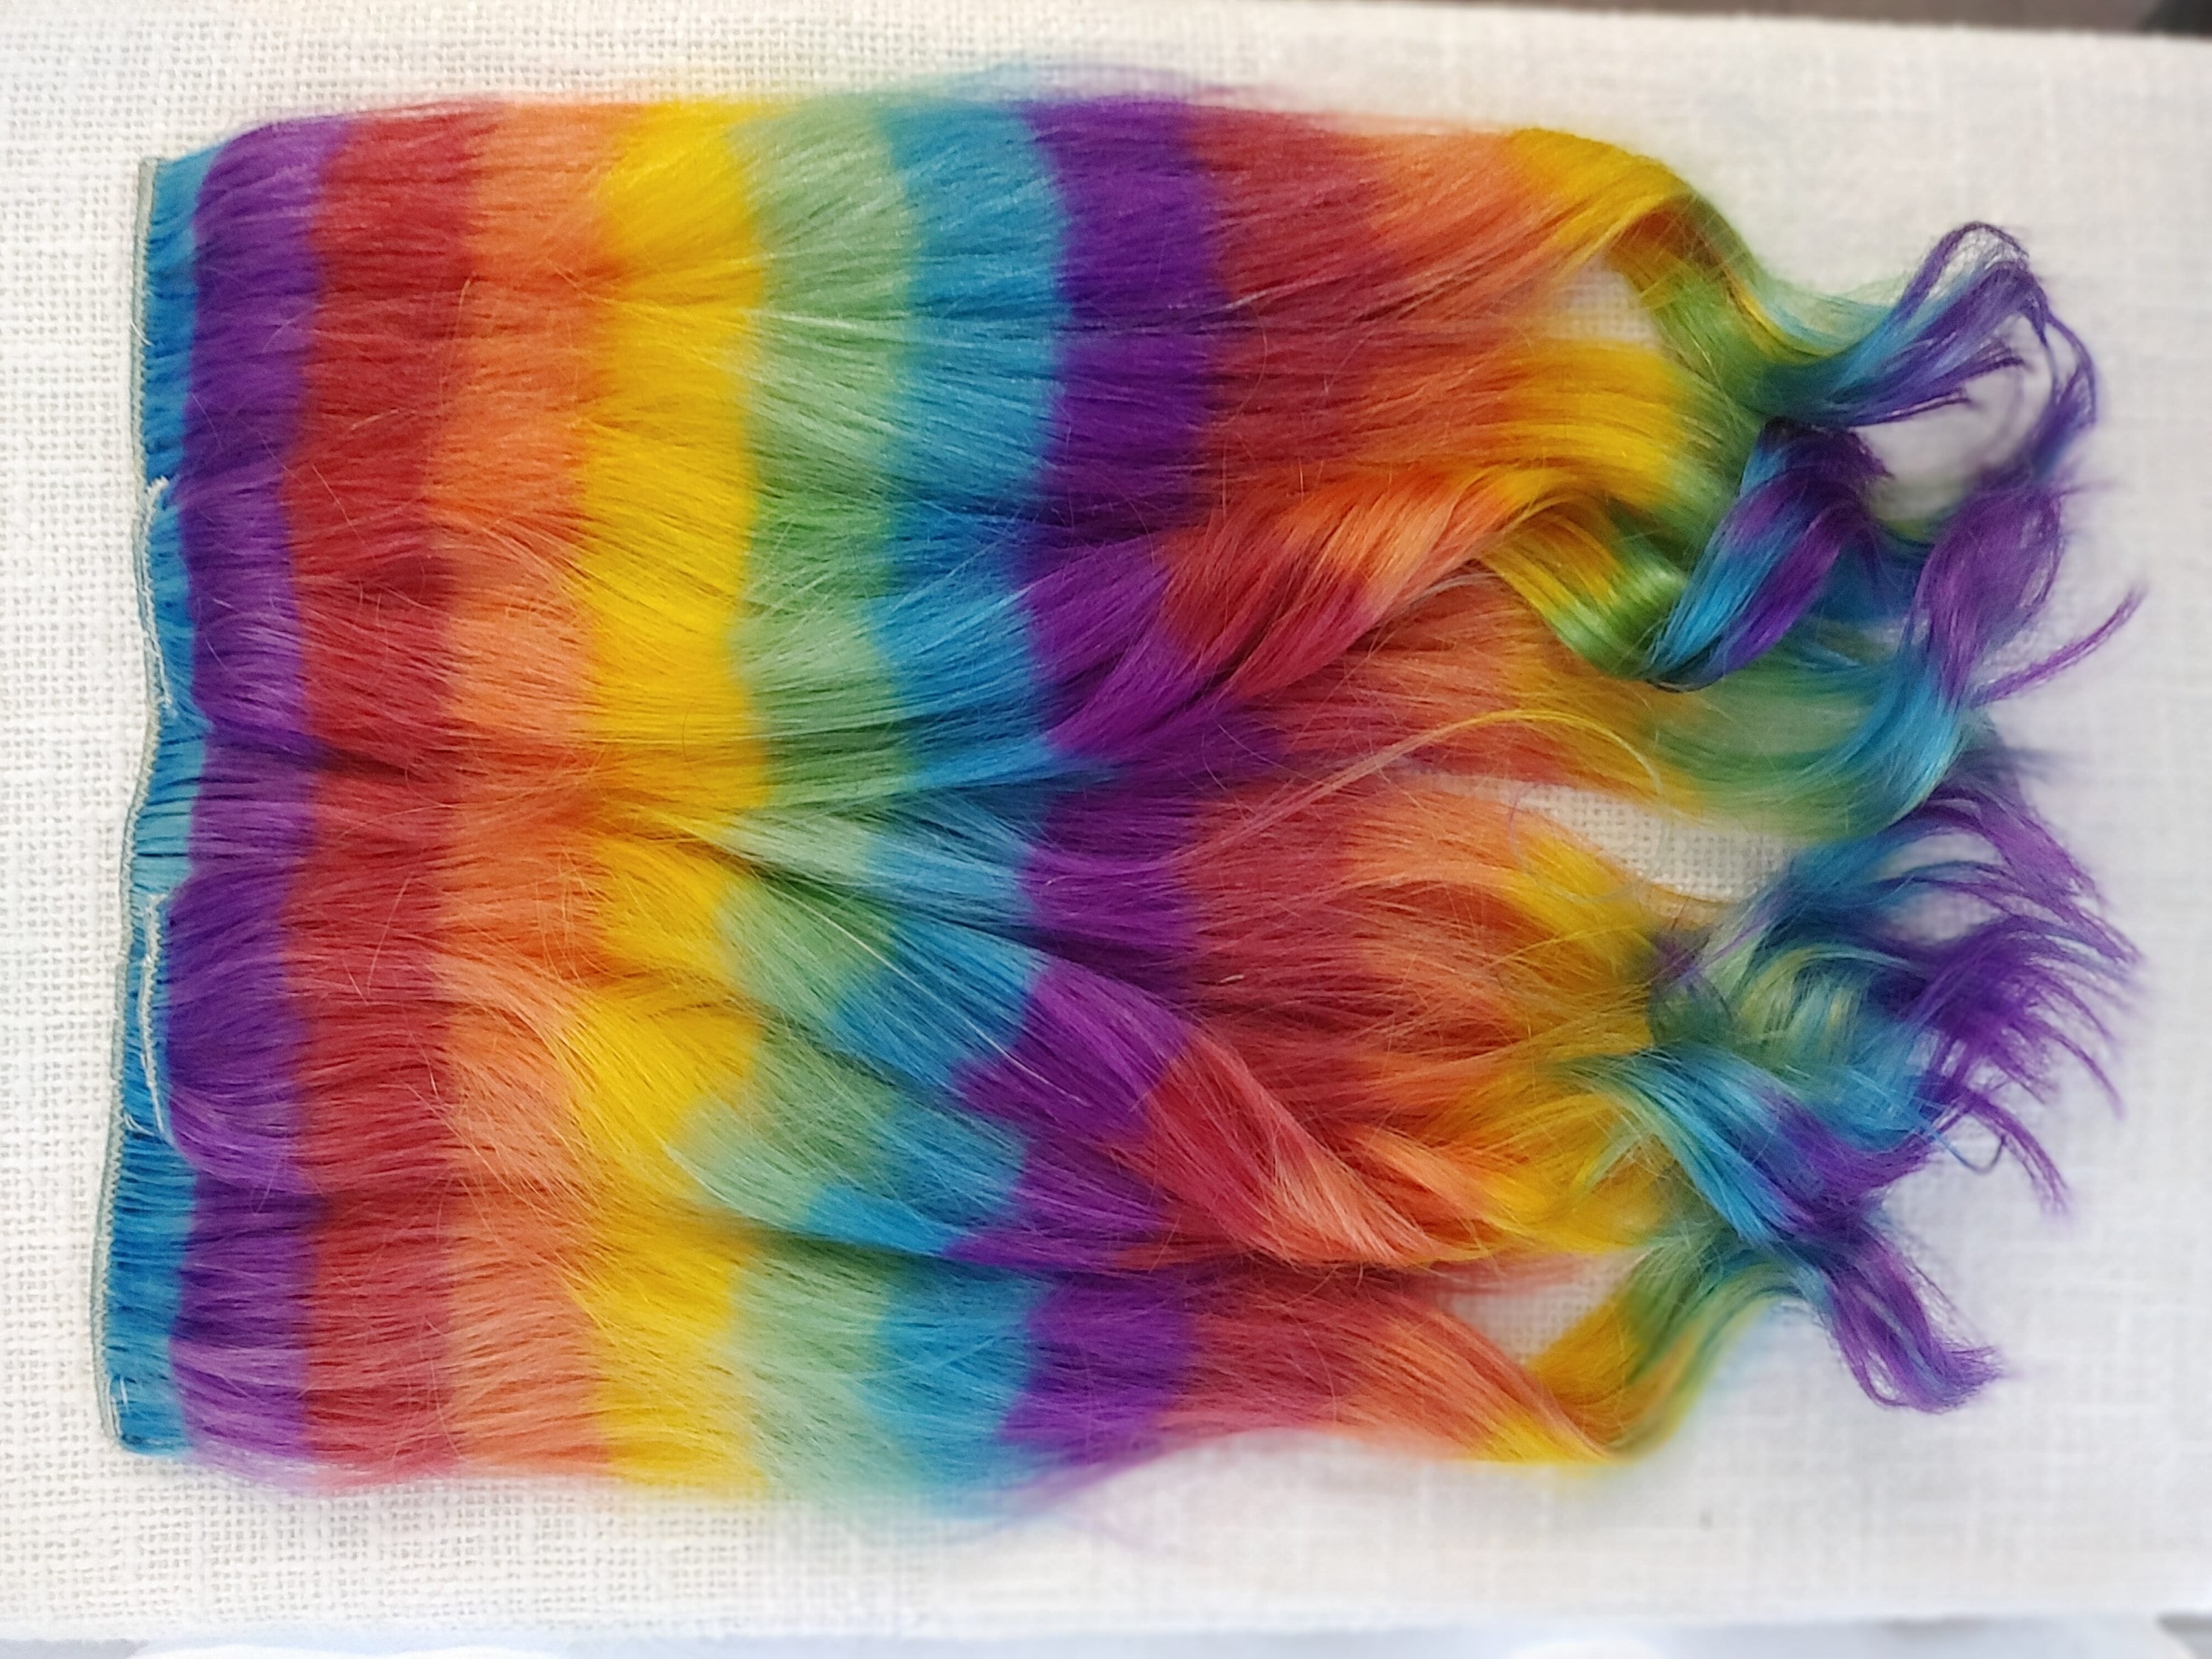 Feather Hair Extension 1pc Colorful Fake Hair Clip in One Piece Rainbow Synthetic Hair Extensions, Human Hair Extensions 18inch Hairpiece for Women